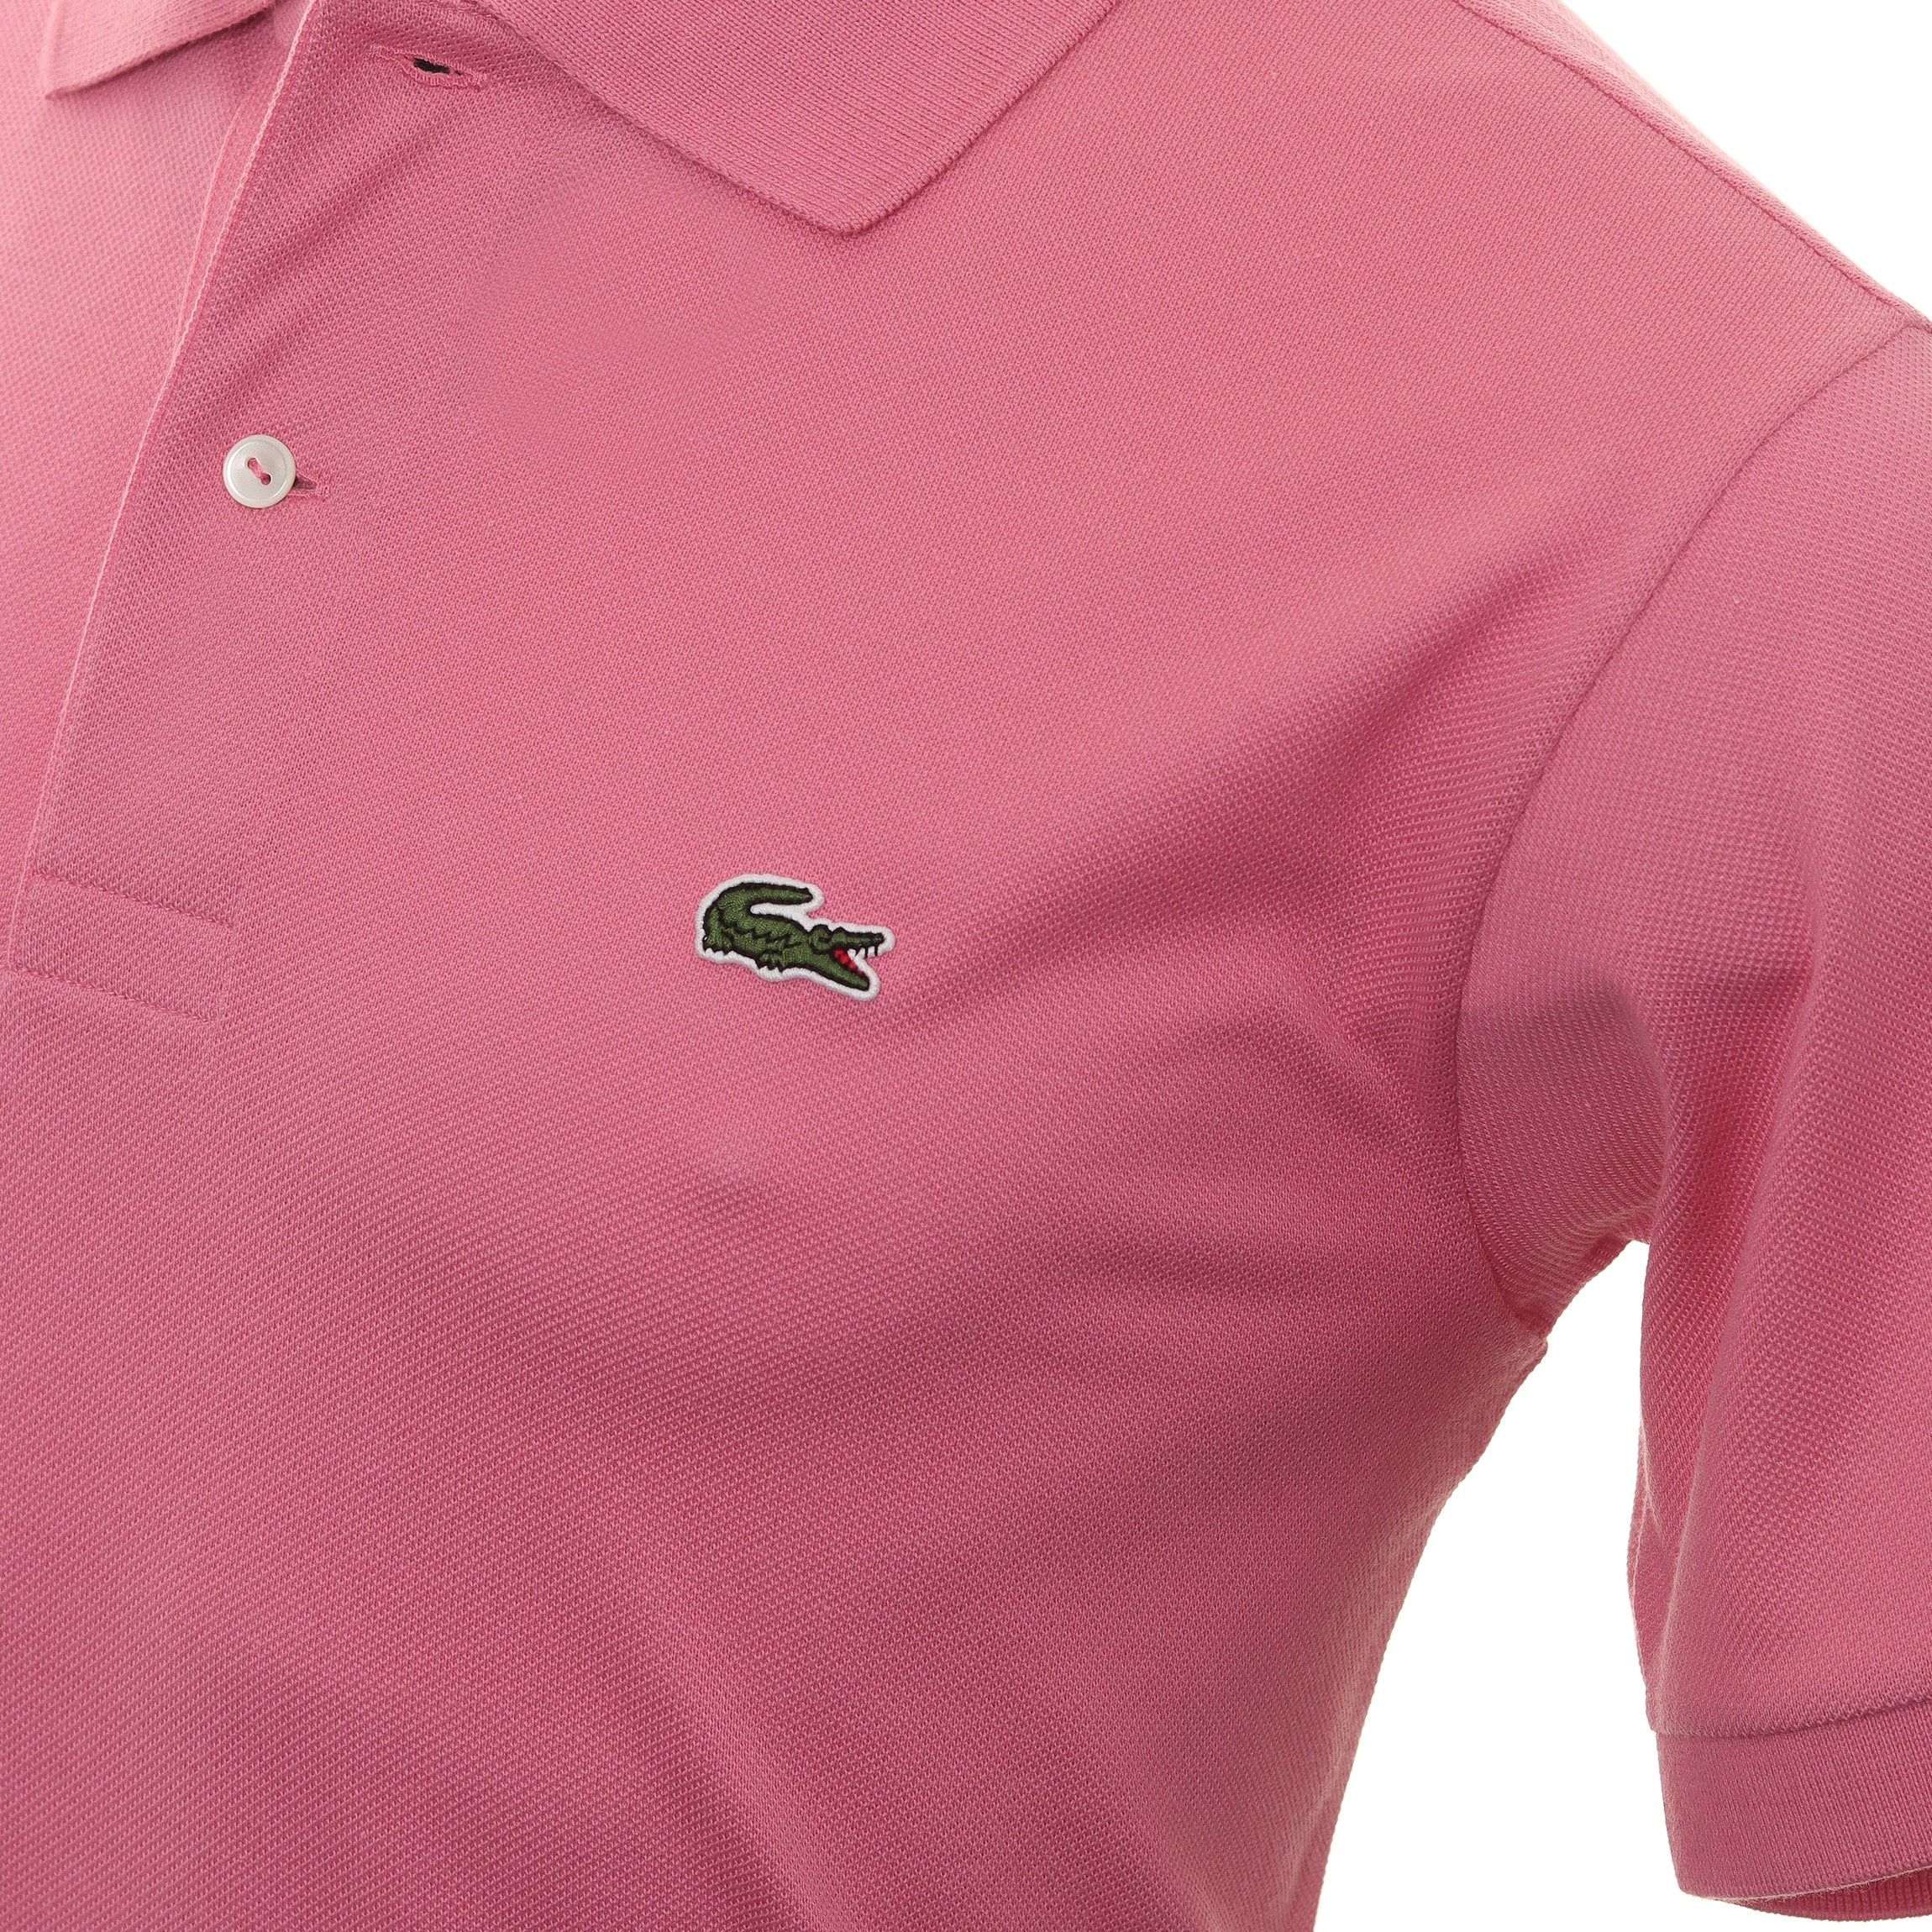 Reseda | Shirt Classic Pink Function18 Lacoste Restrictedgs L1212 Pique Polo 2R3 |